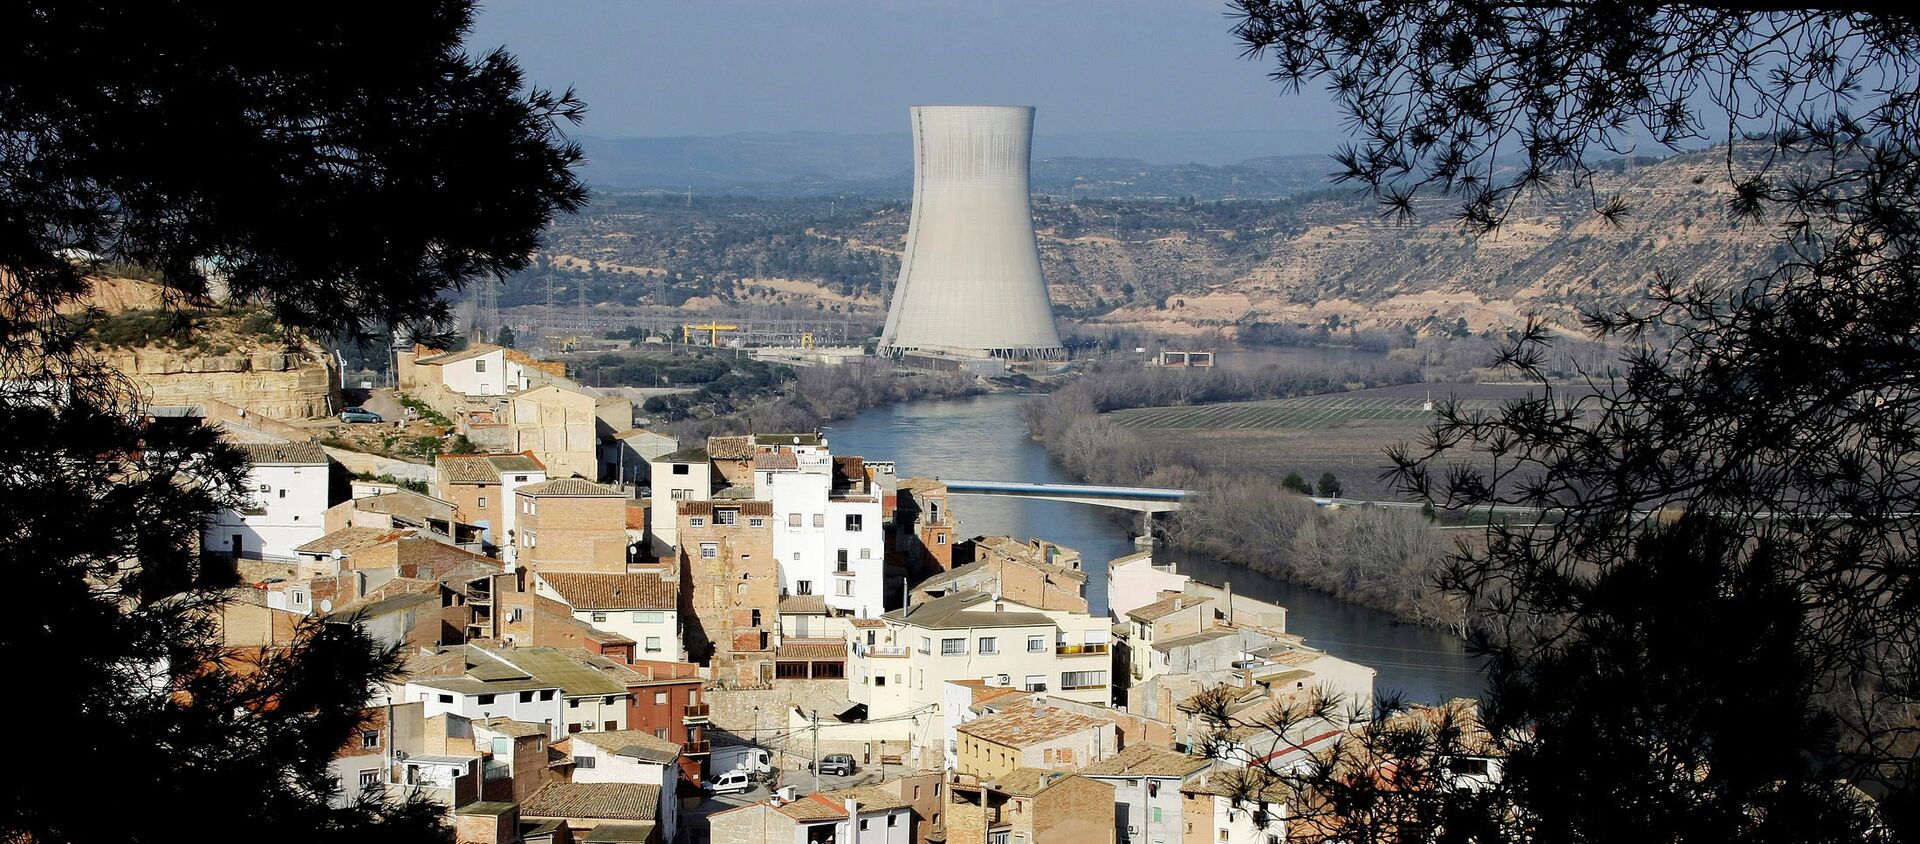 FILE PHOTO: A view of Asco village and a nuclear plant, which uses the waters of the Ebro river water to cool it, in Asco near Tarragona January 27, 2010. - Sputnik International, 1920, 14.02.2019